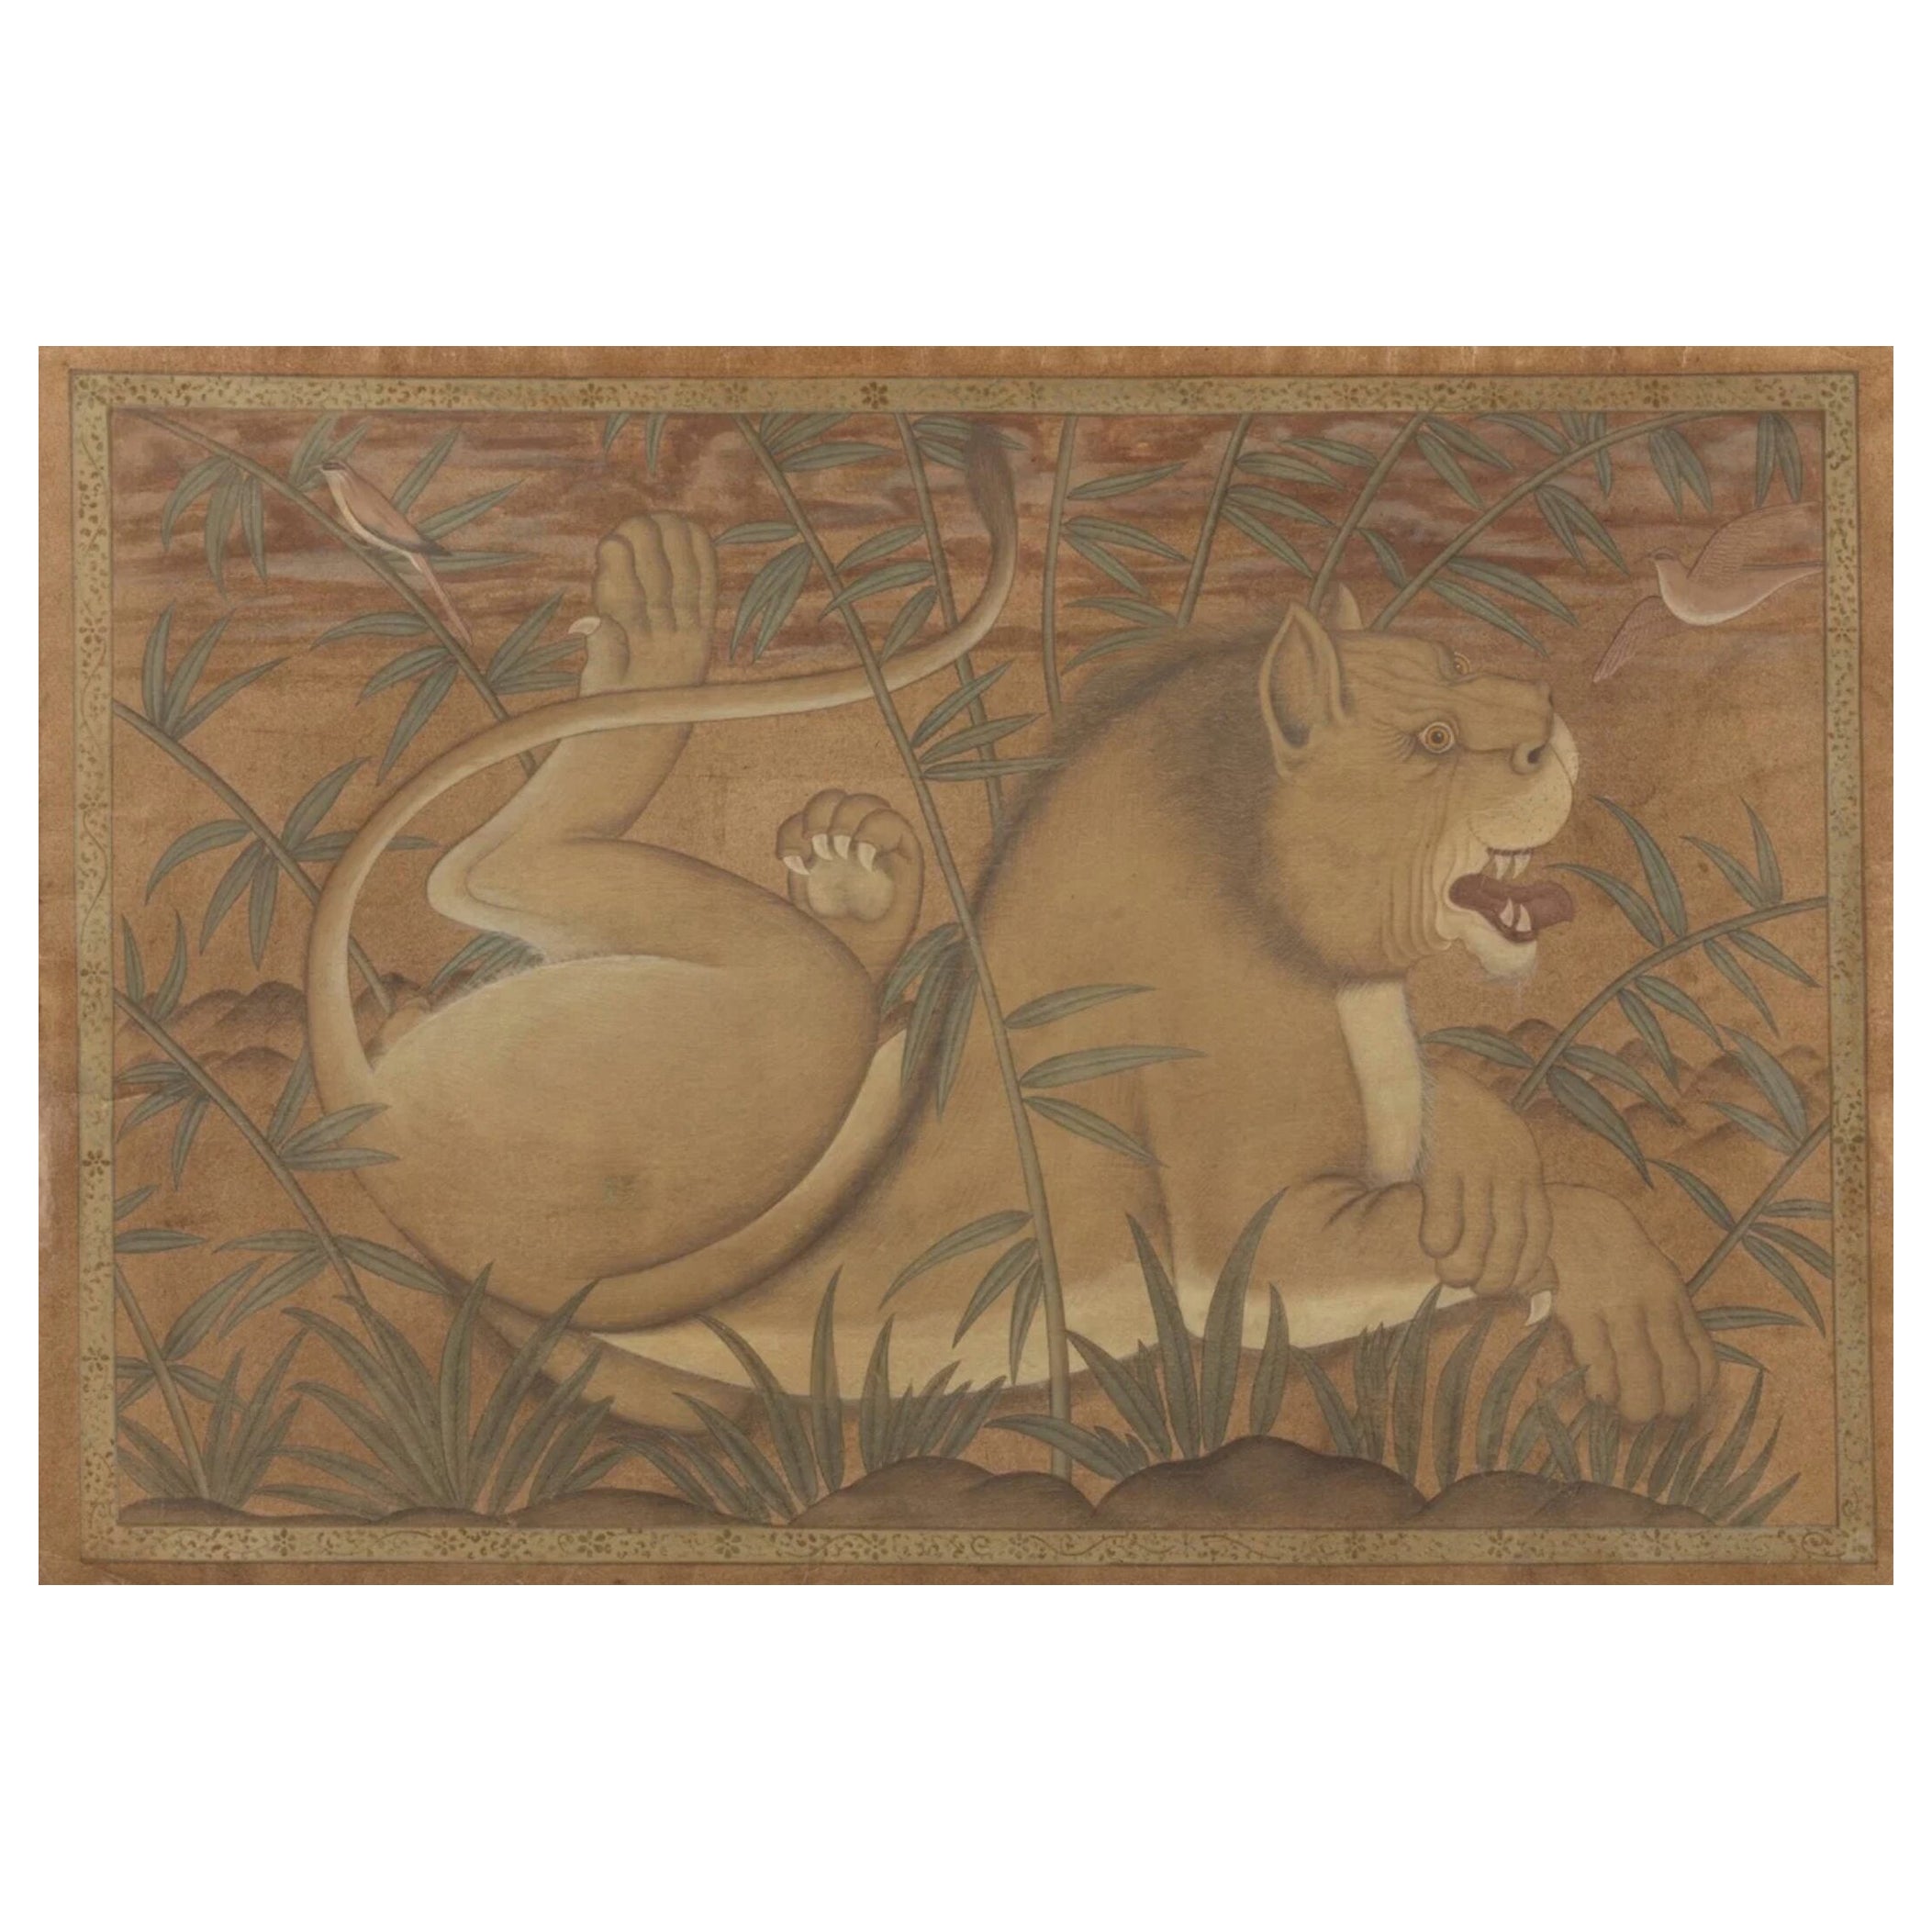 Fine Mughal Painting of a ‘Lion at Rest’, North India, Early 19th Century